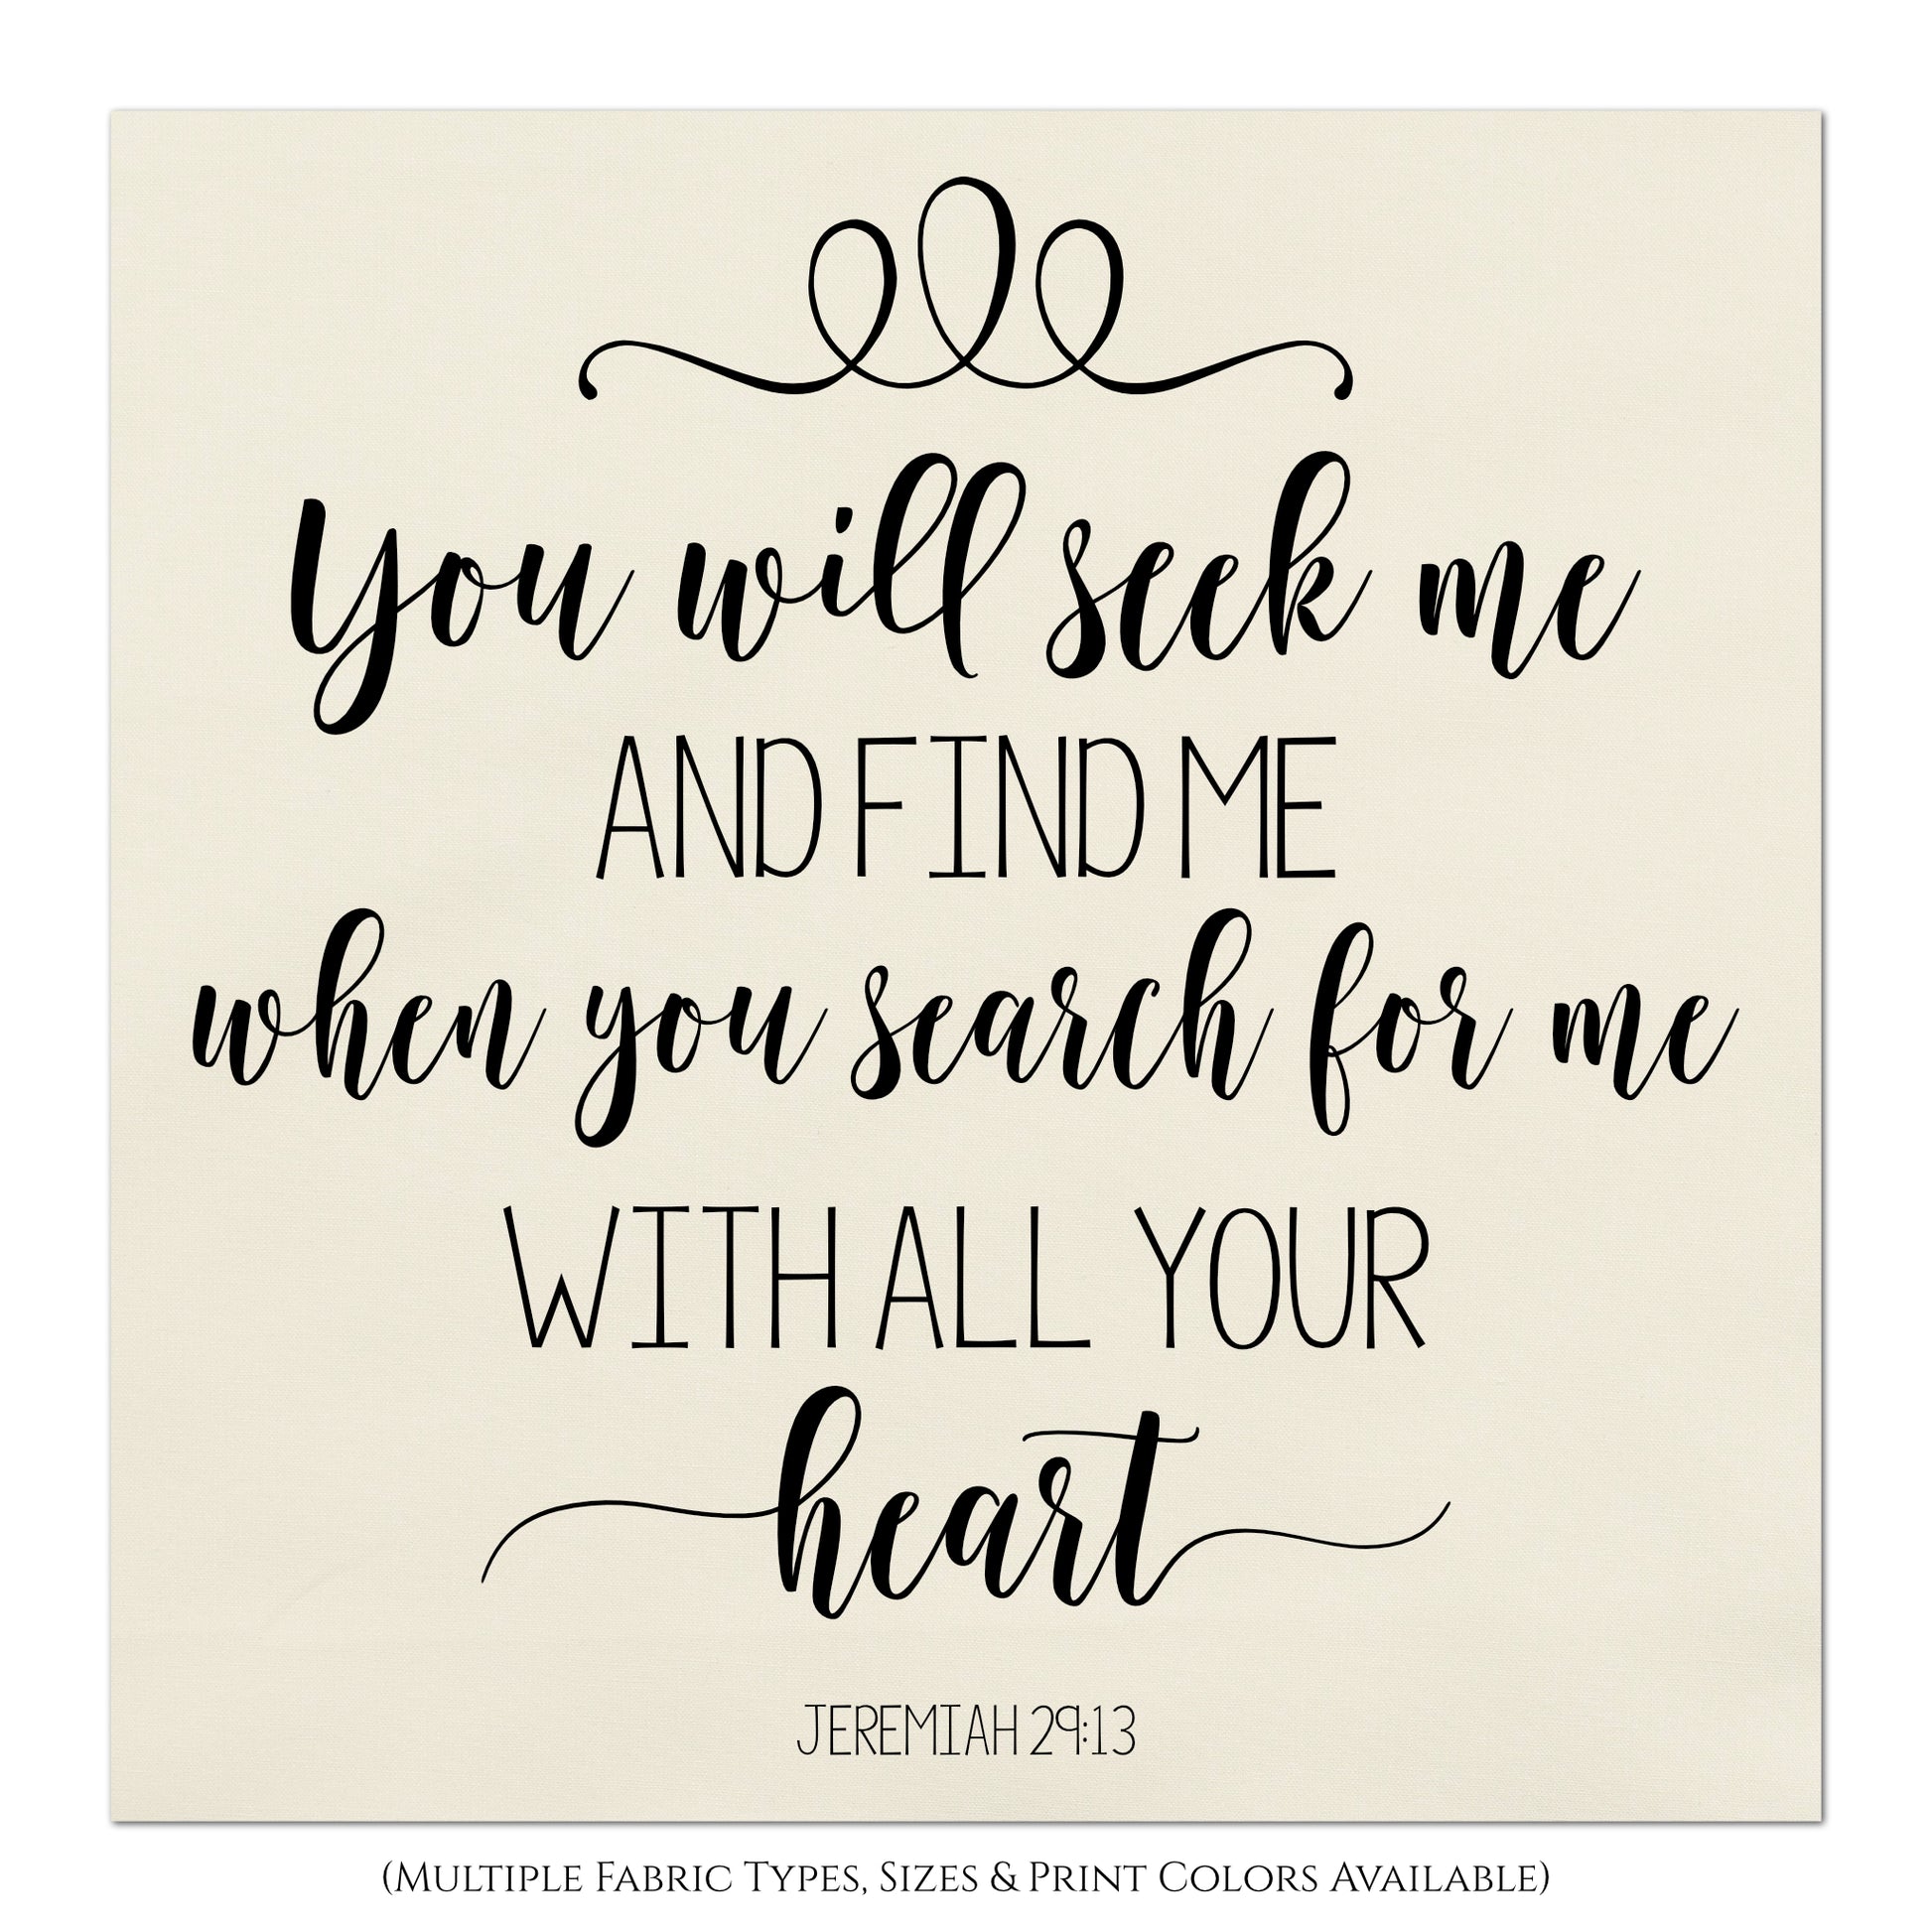 Jeremiah 29 13, Bible Verse, Large Print Fabric, Panel, Block Print Fabric, Cotton, Muslin - Quilt Supplies, Materials, Wall Art, Bags, Sewing Projects